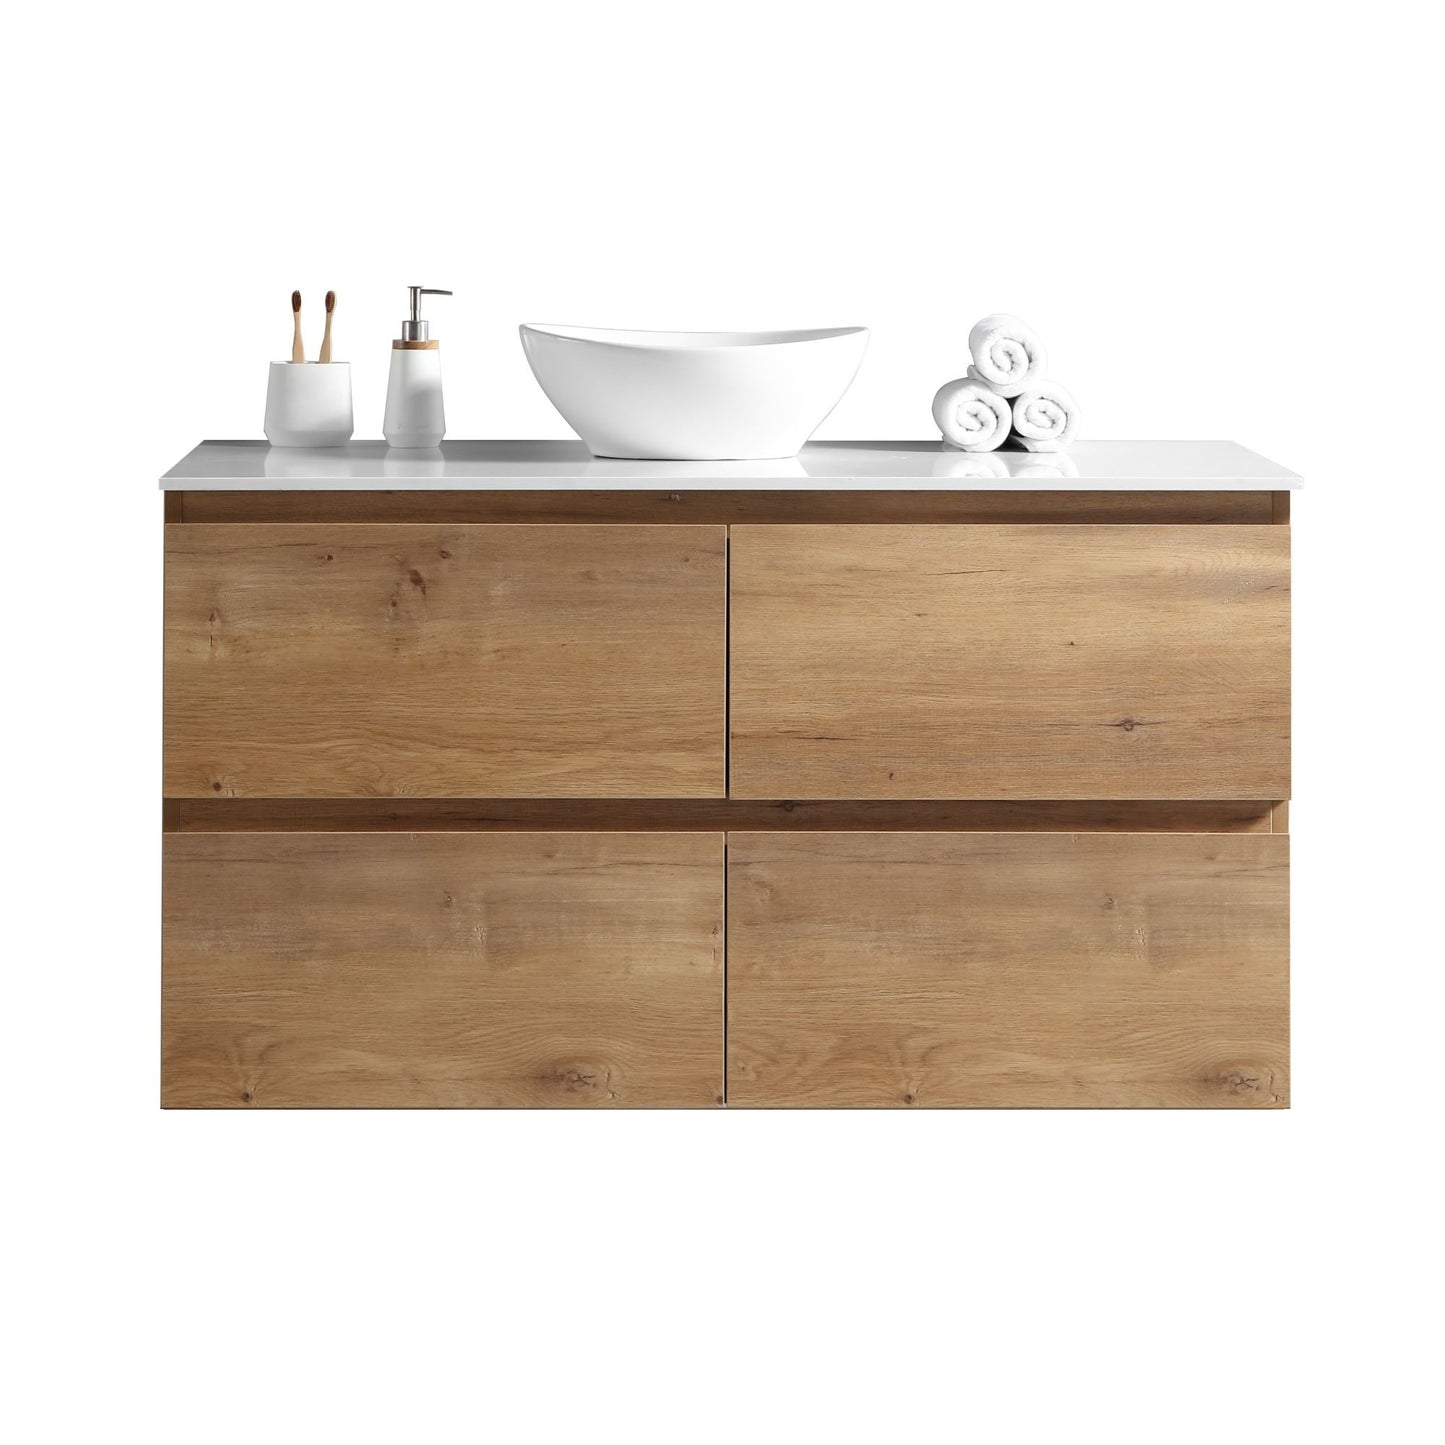 MELA - CLARK 1200 Snafell Wall Hung Vanity with Drawers